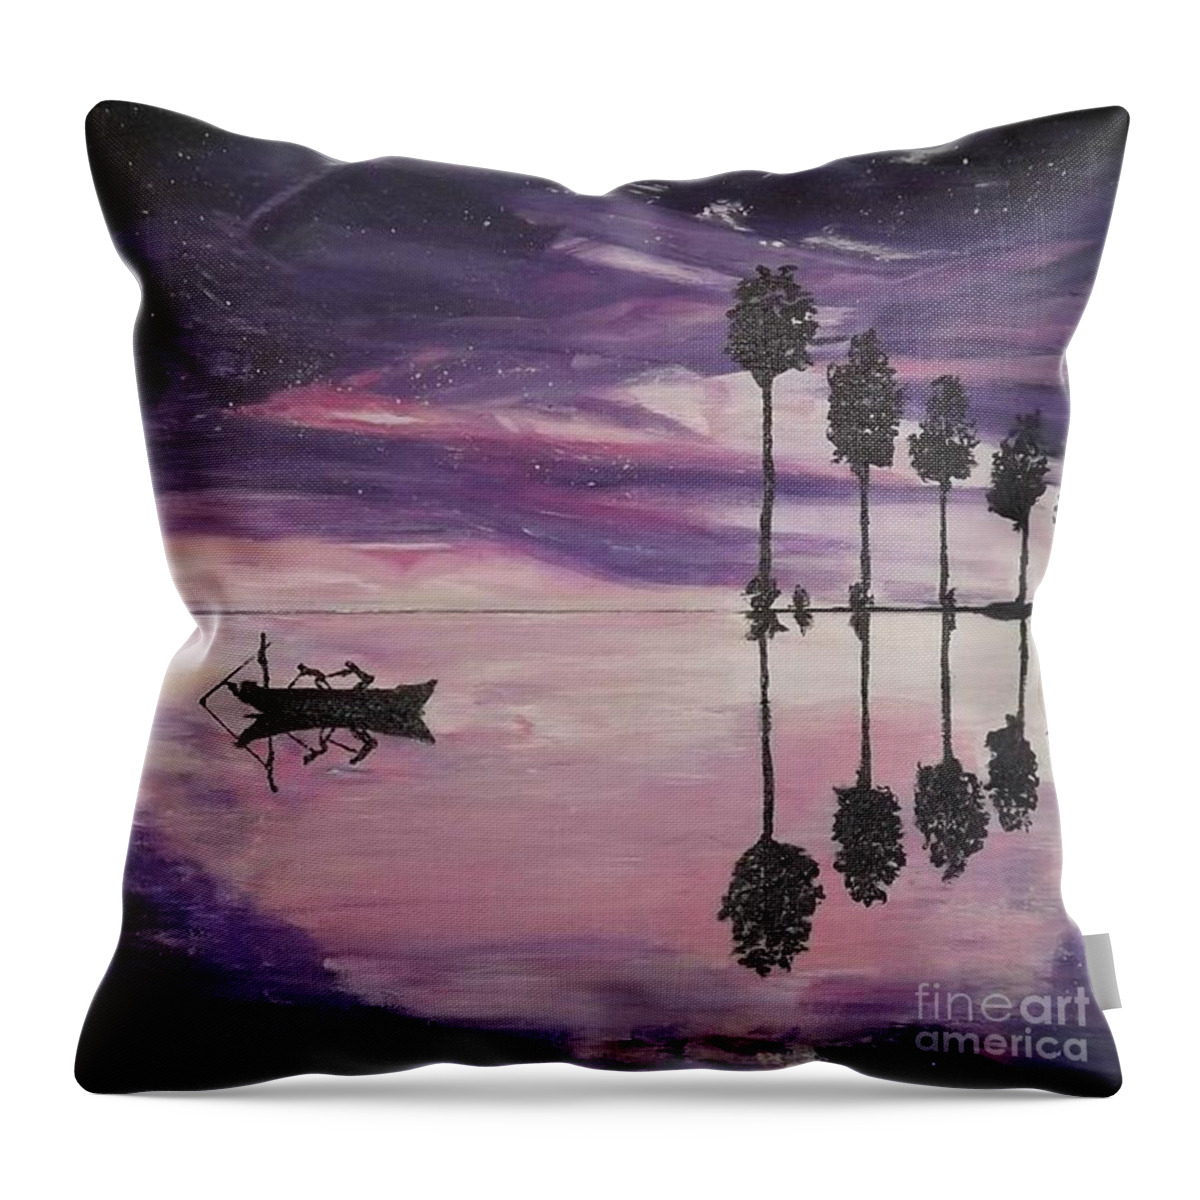 Acrylic Seascape Throw Pillow featuring the painting The Boaters by Denise Morgan